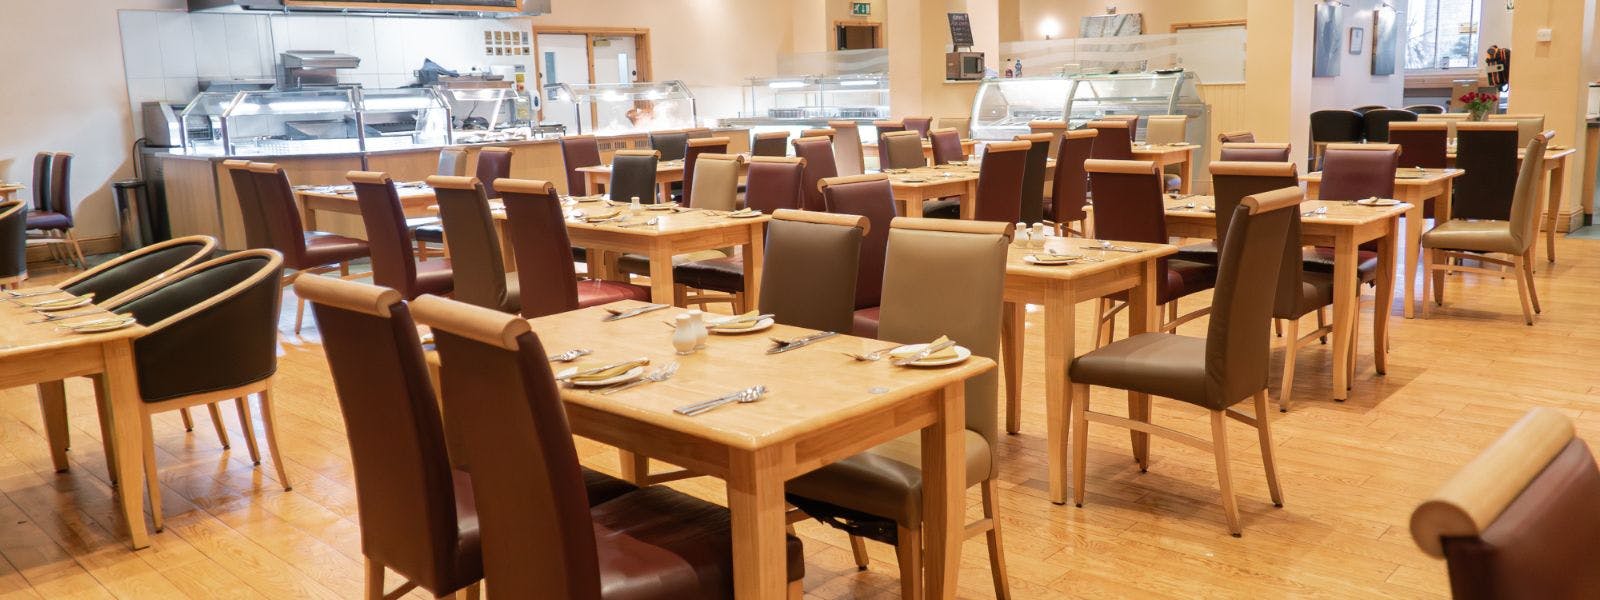 Spacious restaurant with carvery filled with numerous tables and chairs.